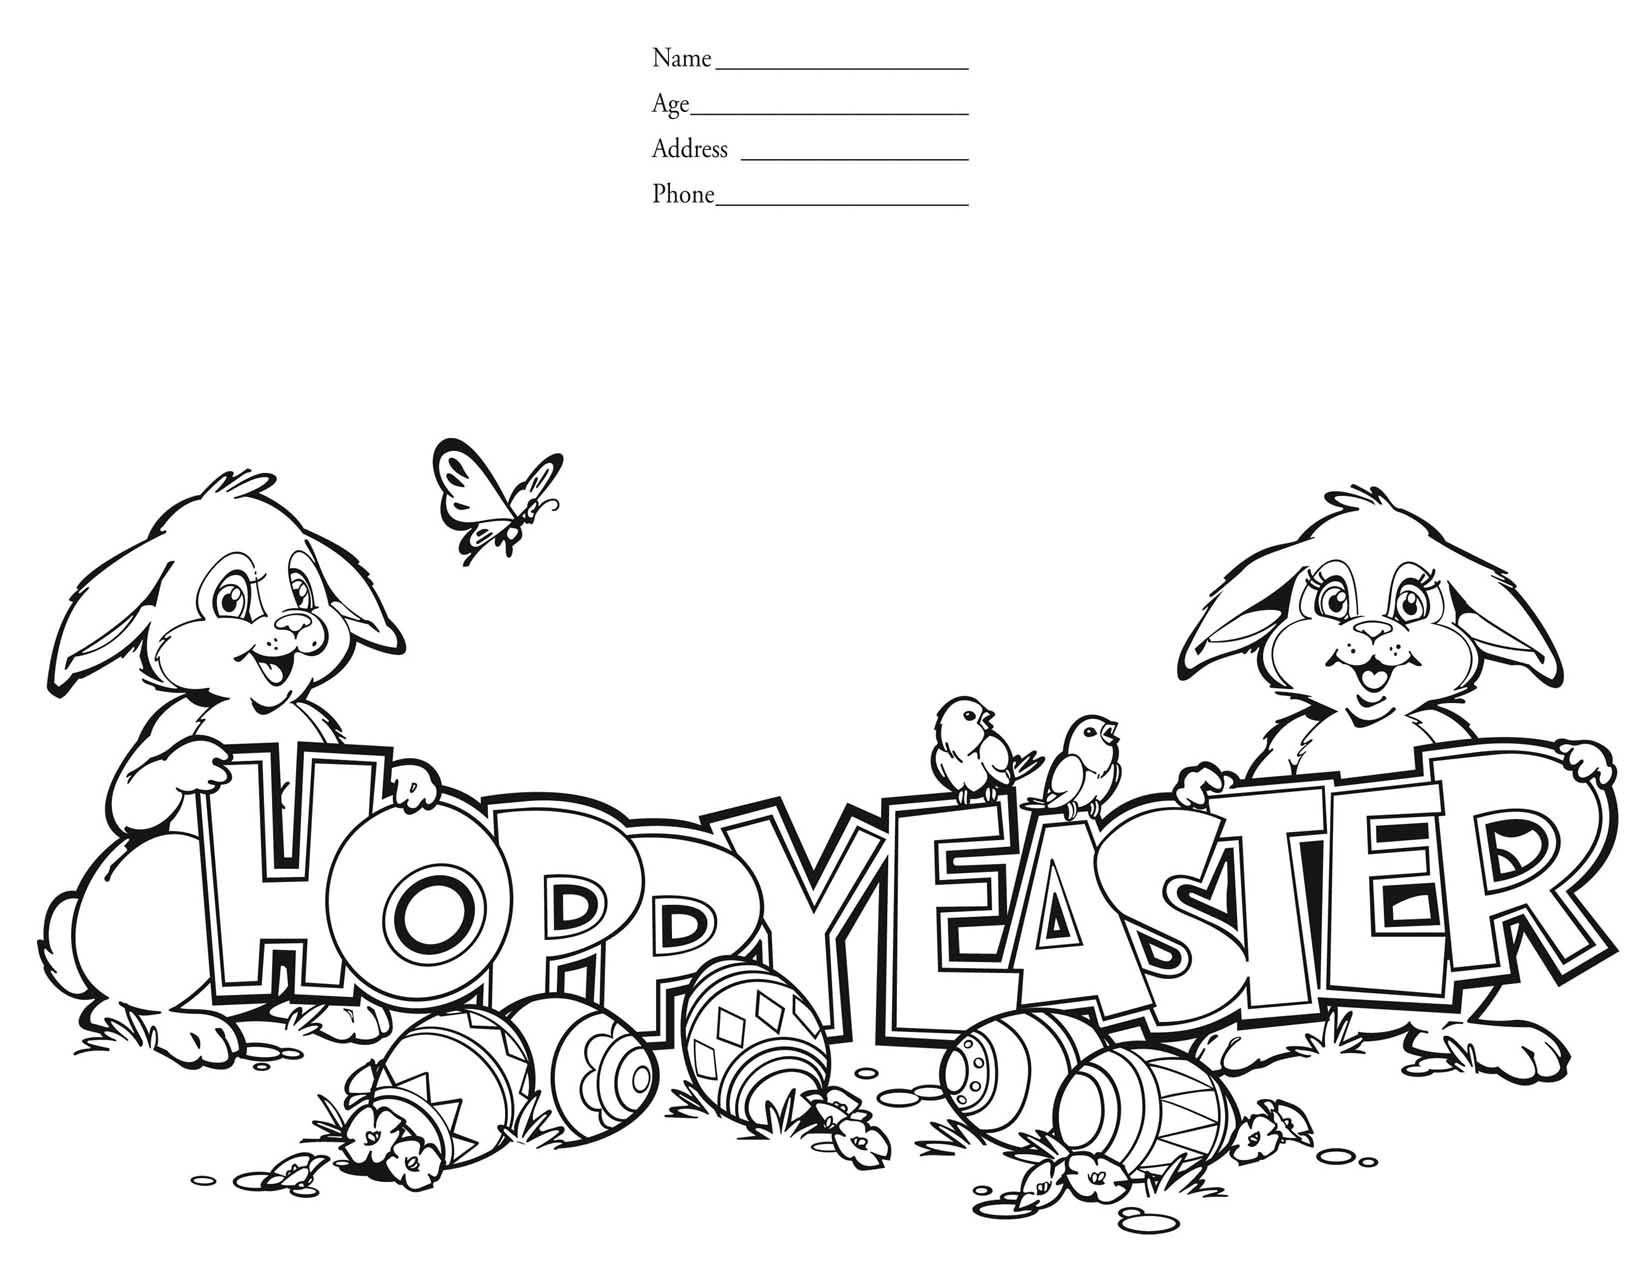   Easter Coloring Pages Ideas With Images - MagMent